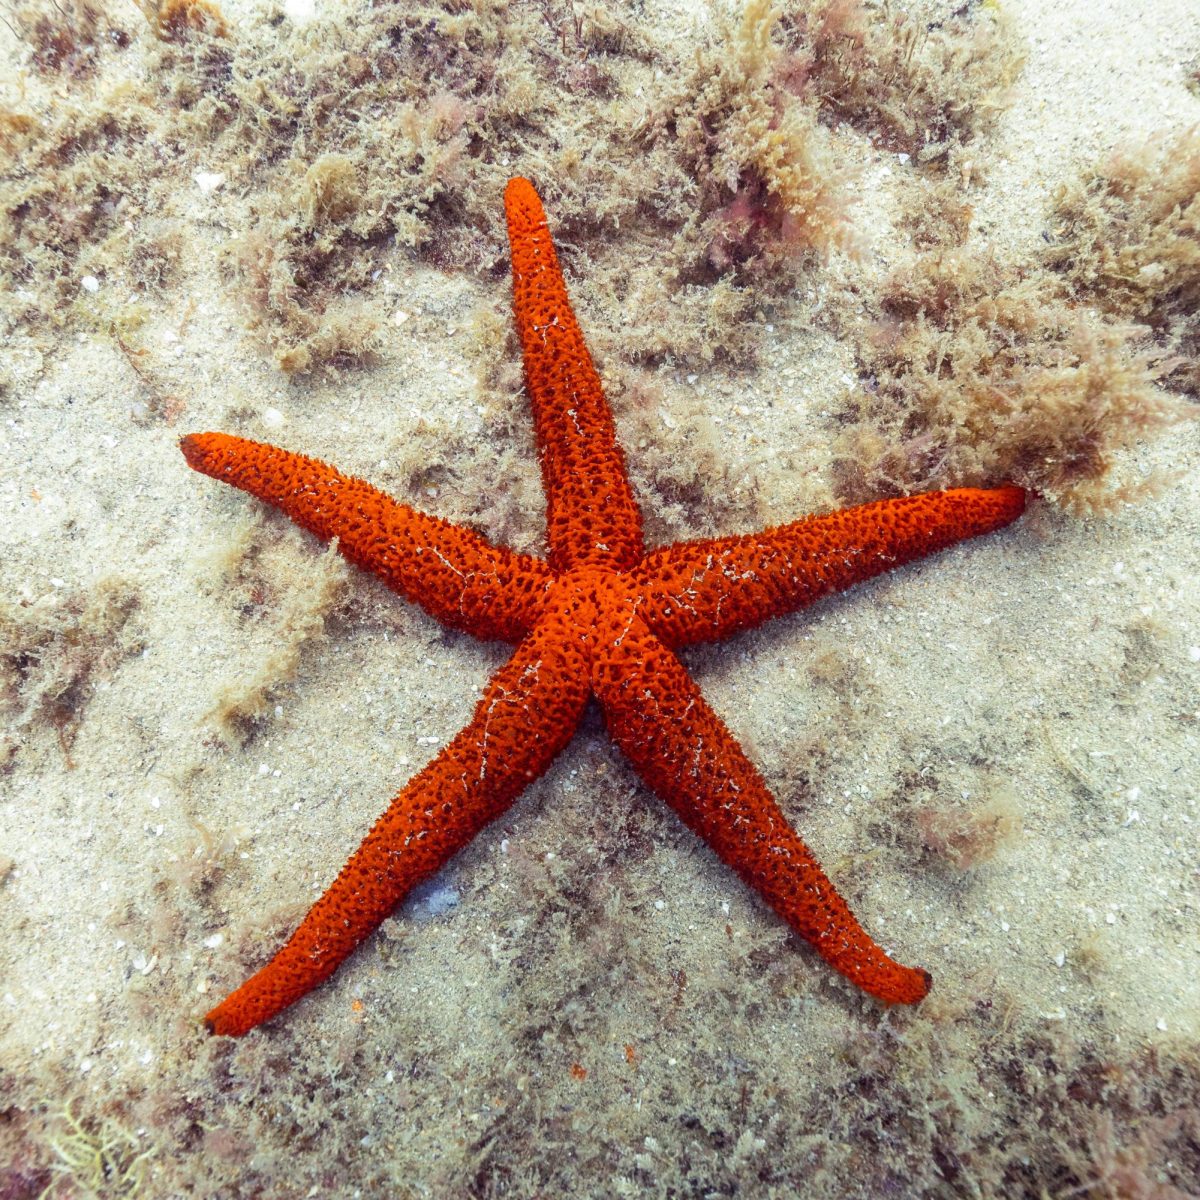 Scientists Discover New Information About Starfish